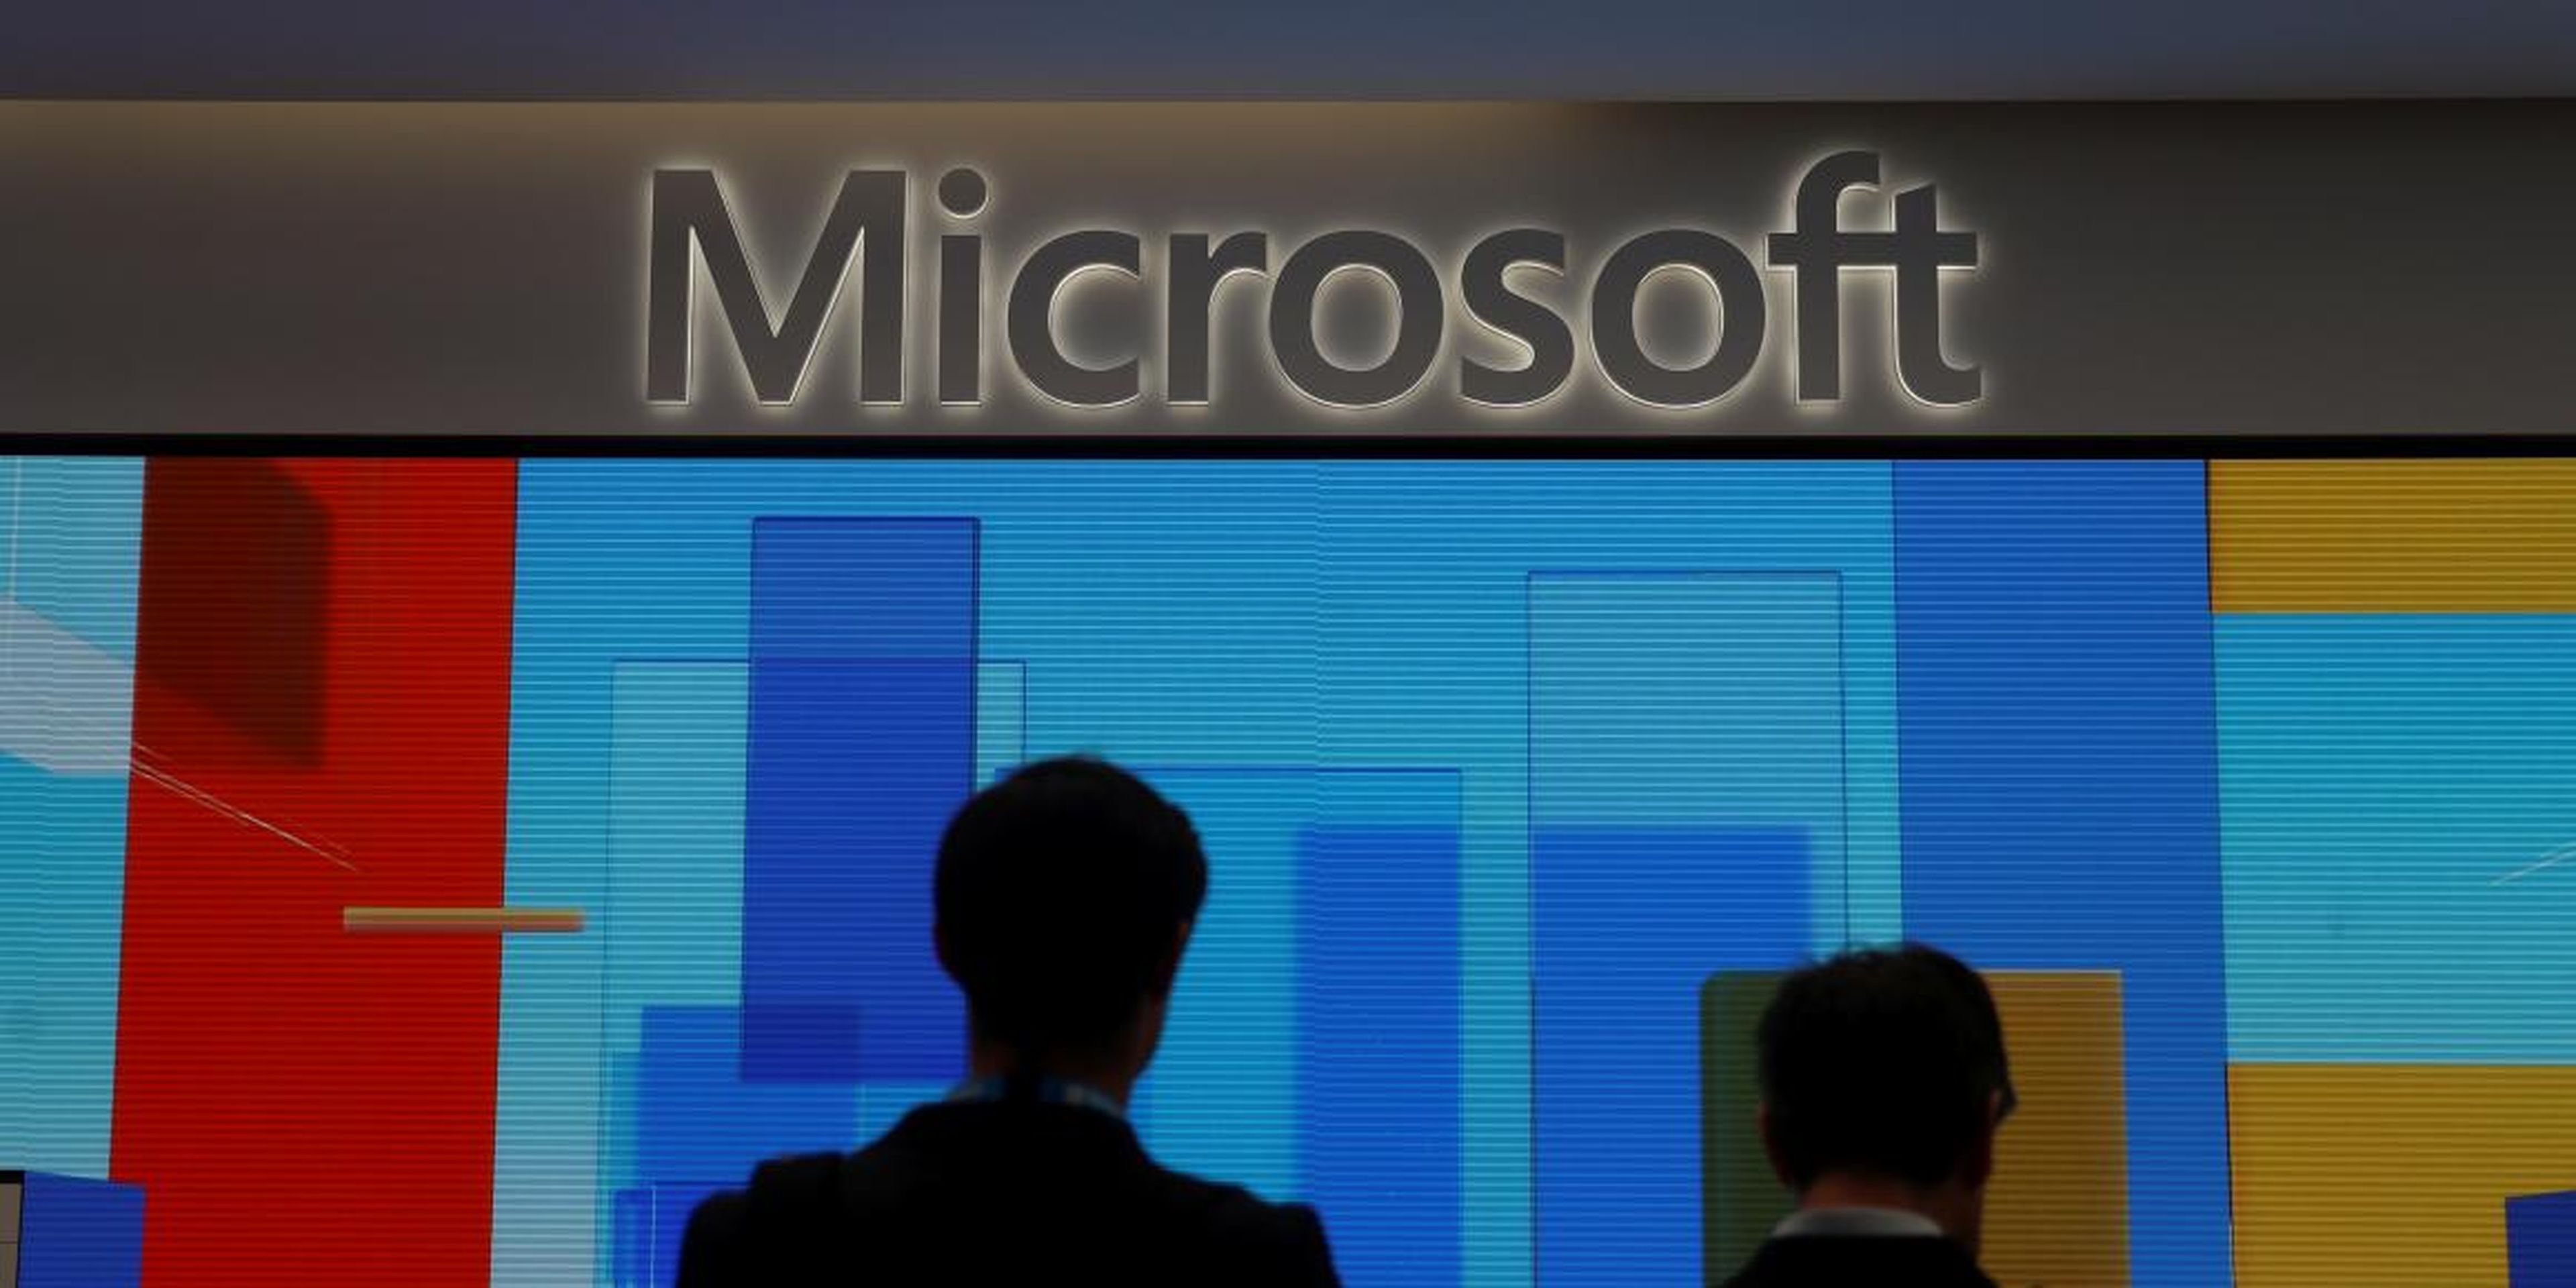 Microsoft share just opened at a record high after beating Amazon to a controversial contract with the Pentagon worth $10 billion